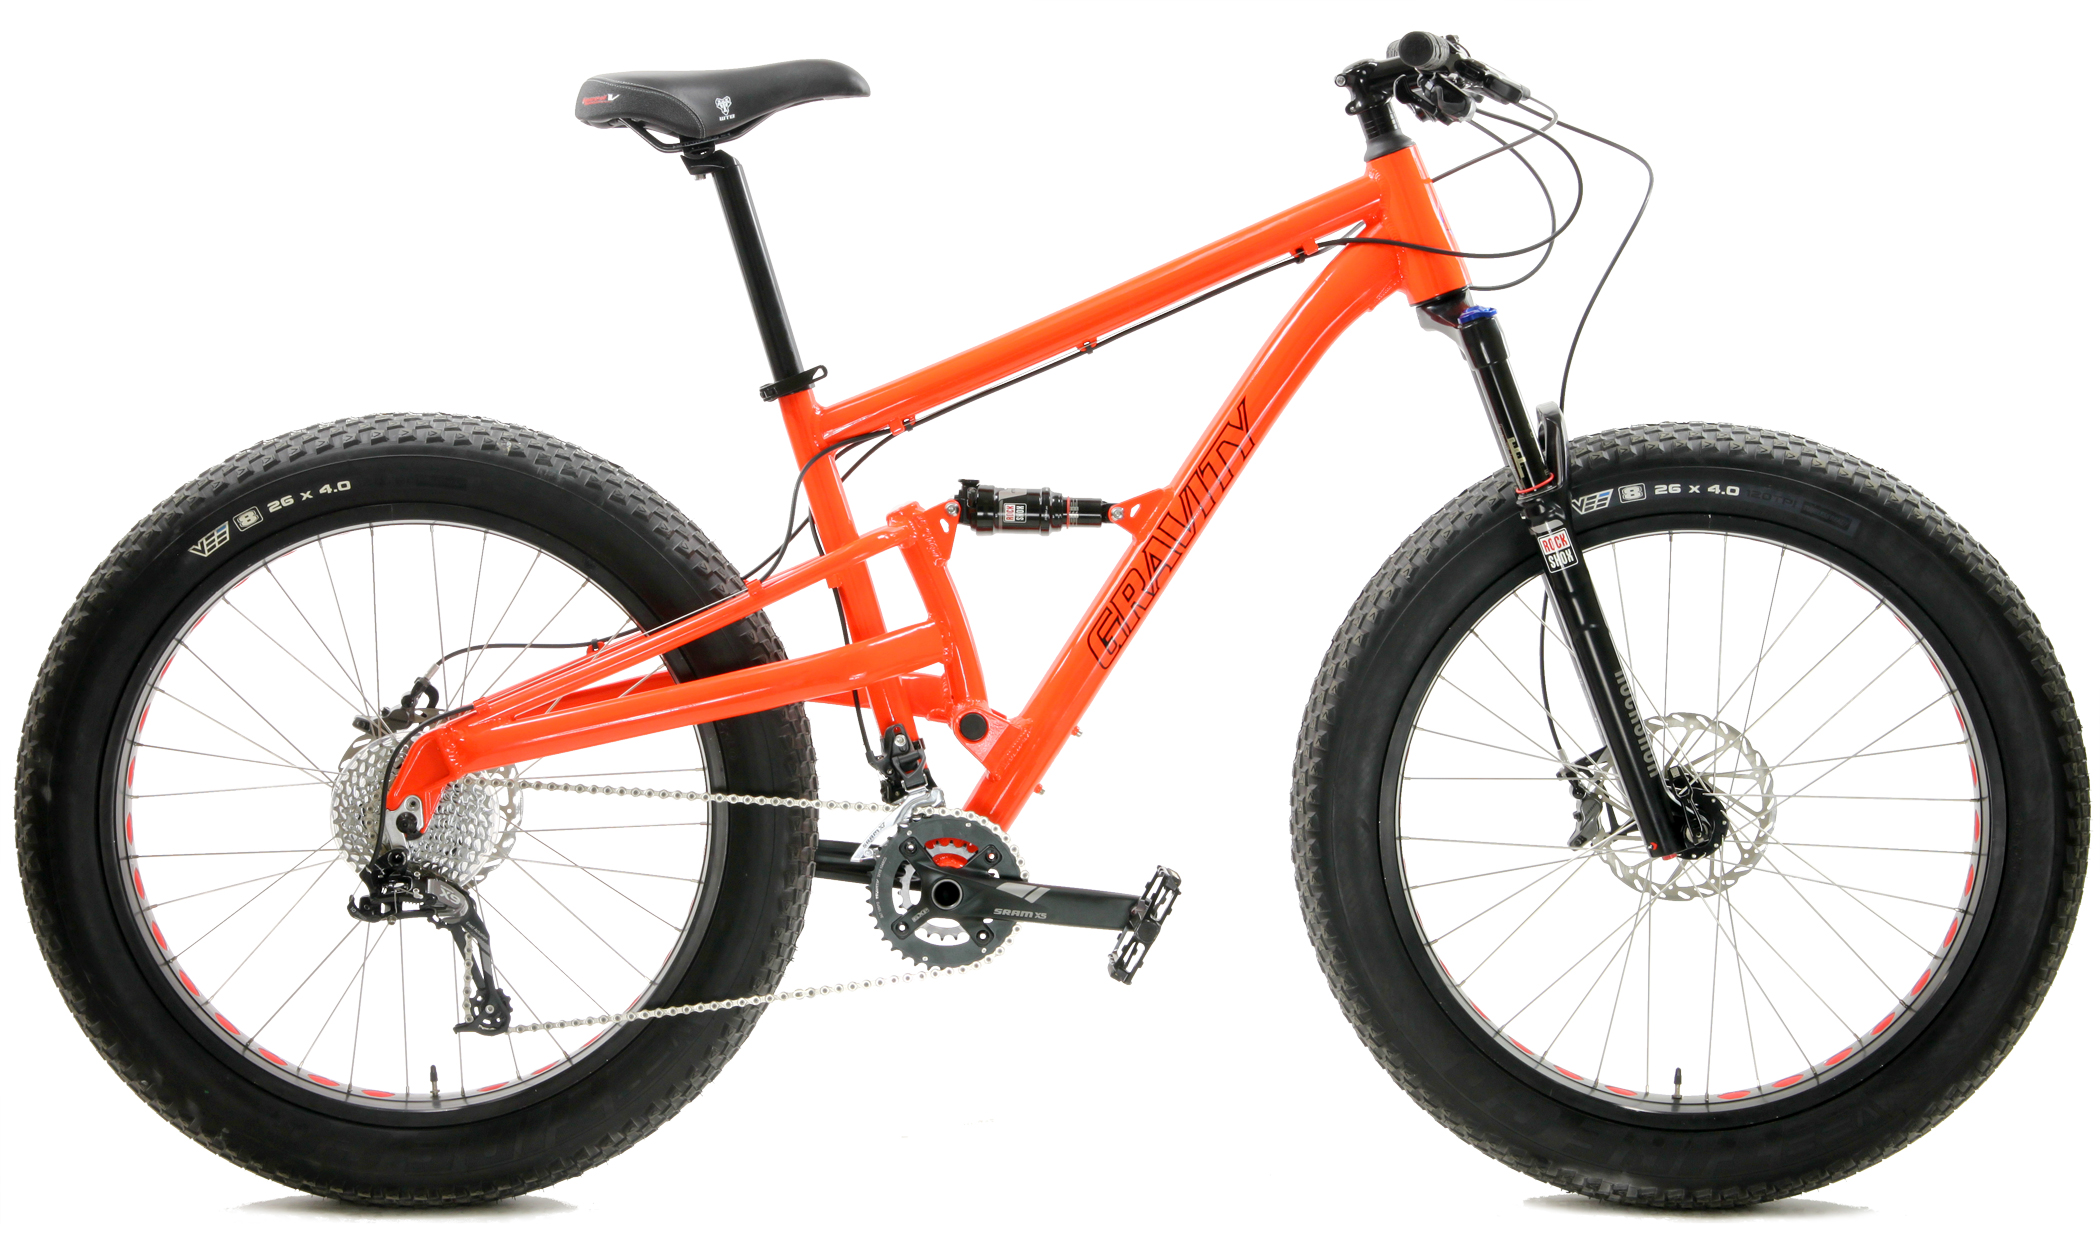 Full Suspension FatBikes Save Up to 60% Off Rockshox Bluto Fatbikes